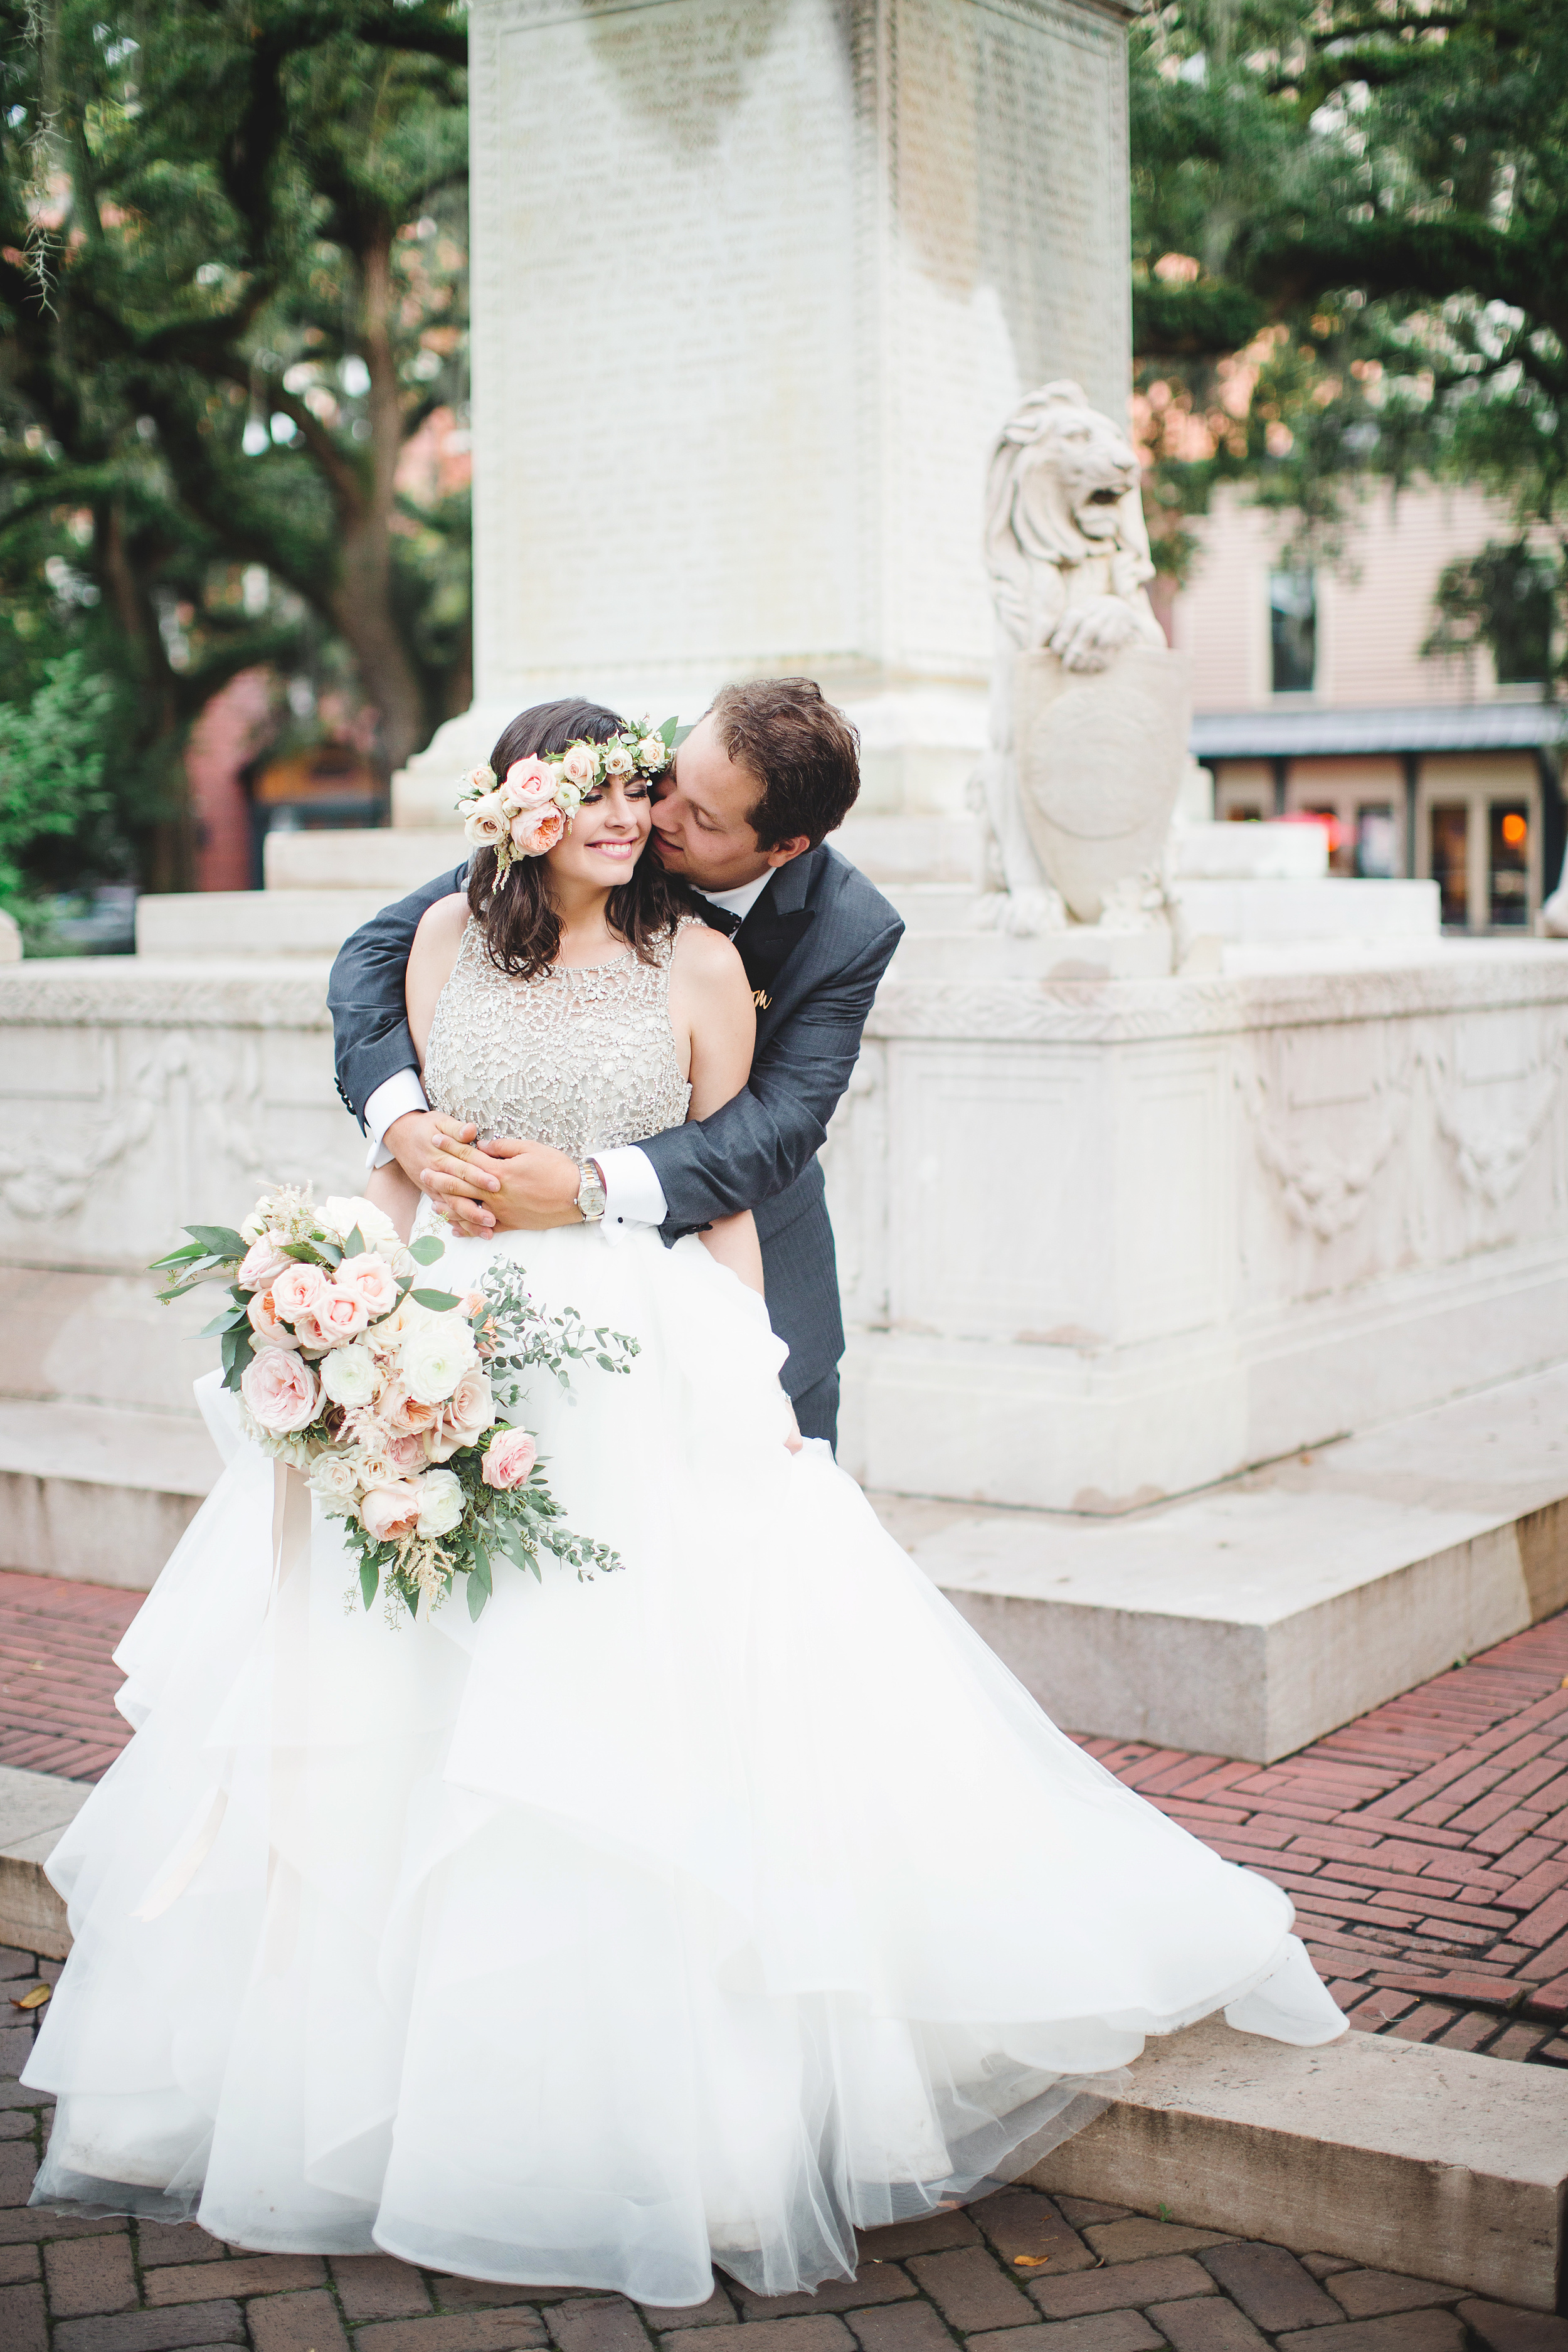 daniela-and-pedro-wedding-izzy-hudgins-photography-a-to-zinnias-whitfield-square-charles-h-morris-center-wedding-ivoyy-and-beau-bridal-boutique-dorie-hayley-paige-savannah-wedding-planner-savannah-bridal-boutique-savannah-weddings-38.jpg